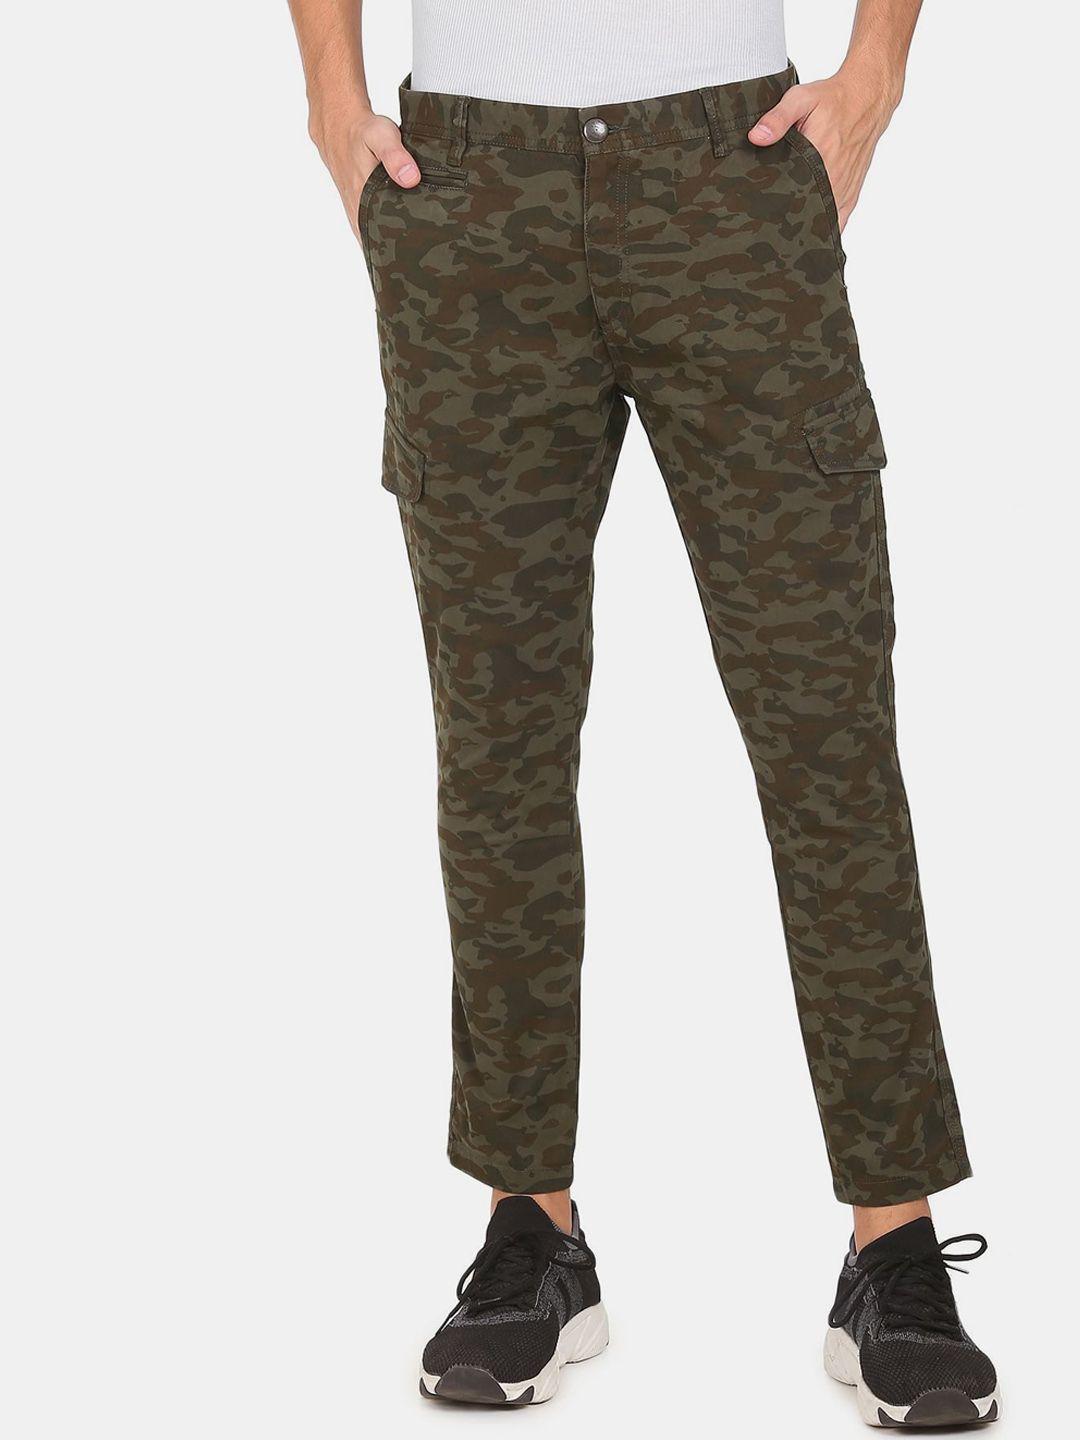 u.s.-polo-assn.-denim-co.-men-olive-green-&-brown-camouflage-printed-cargos-trousers